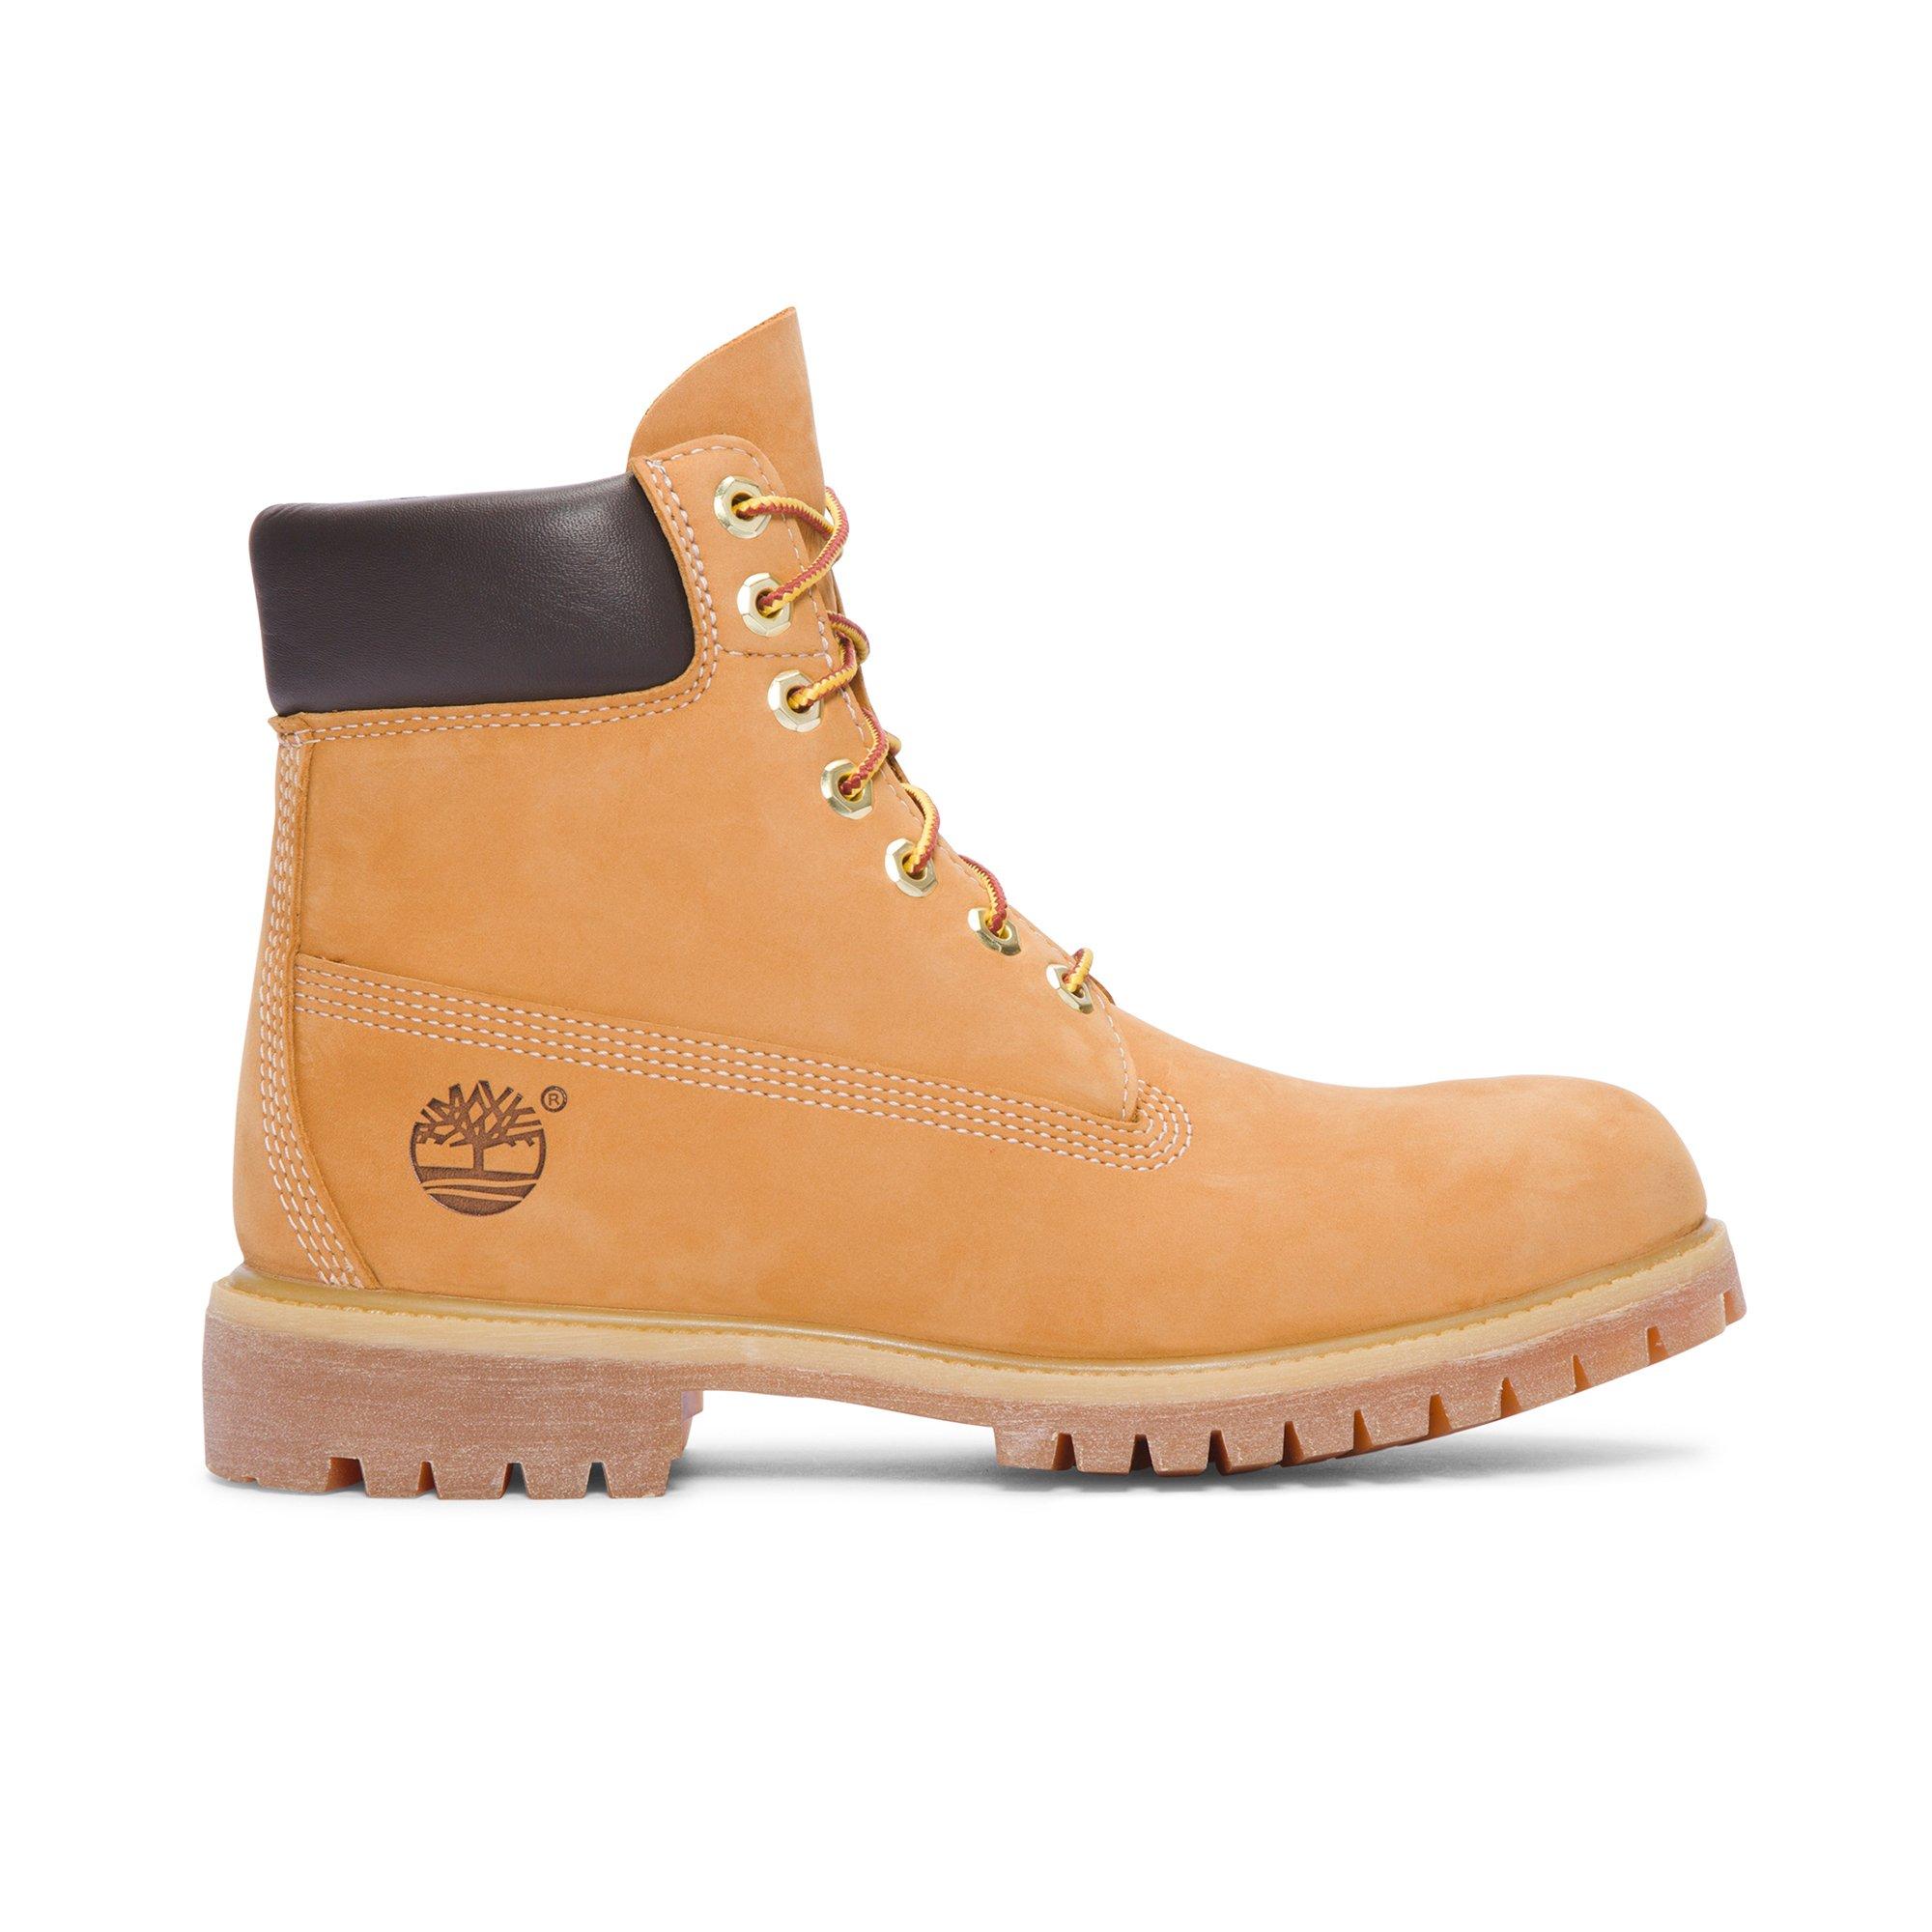 cheapest place to get timberlands